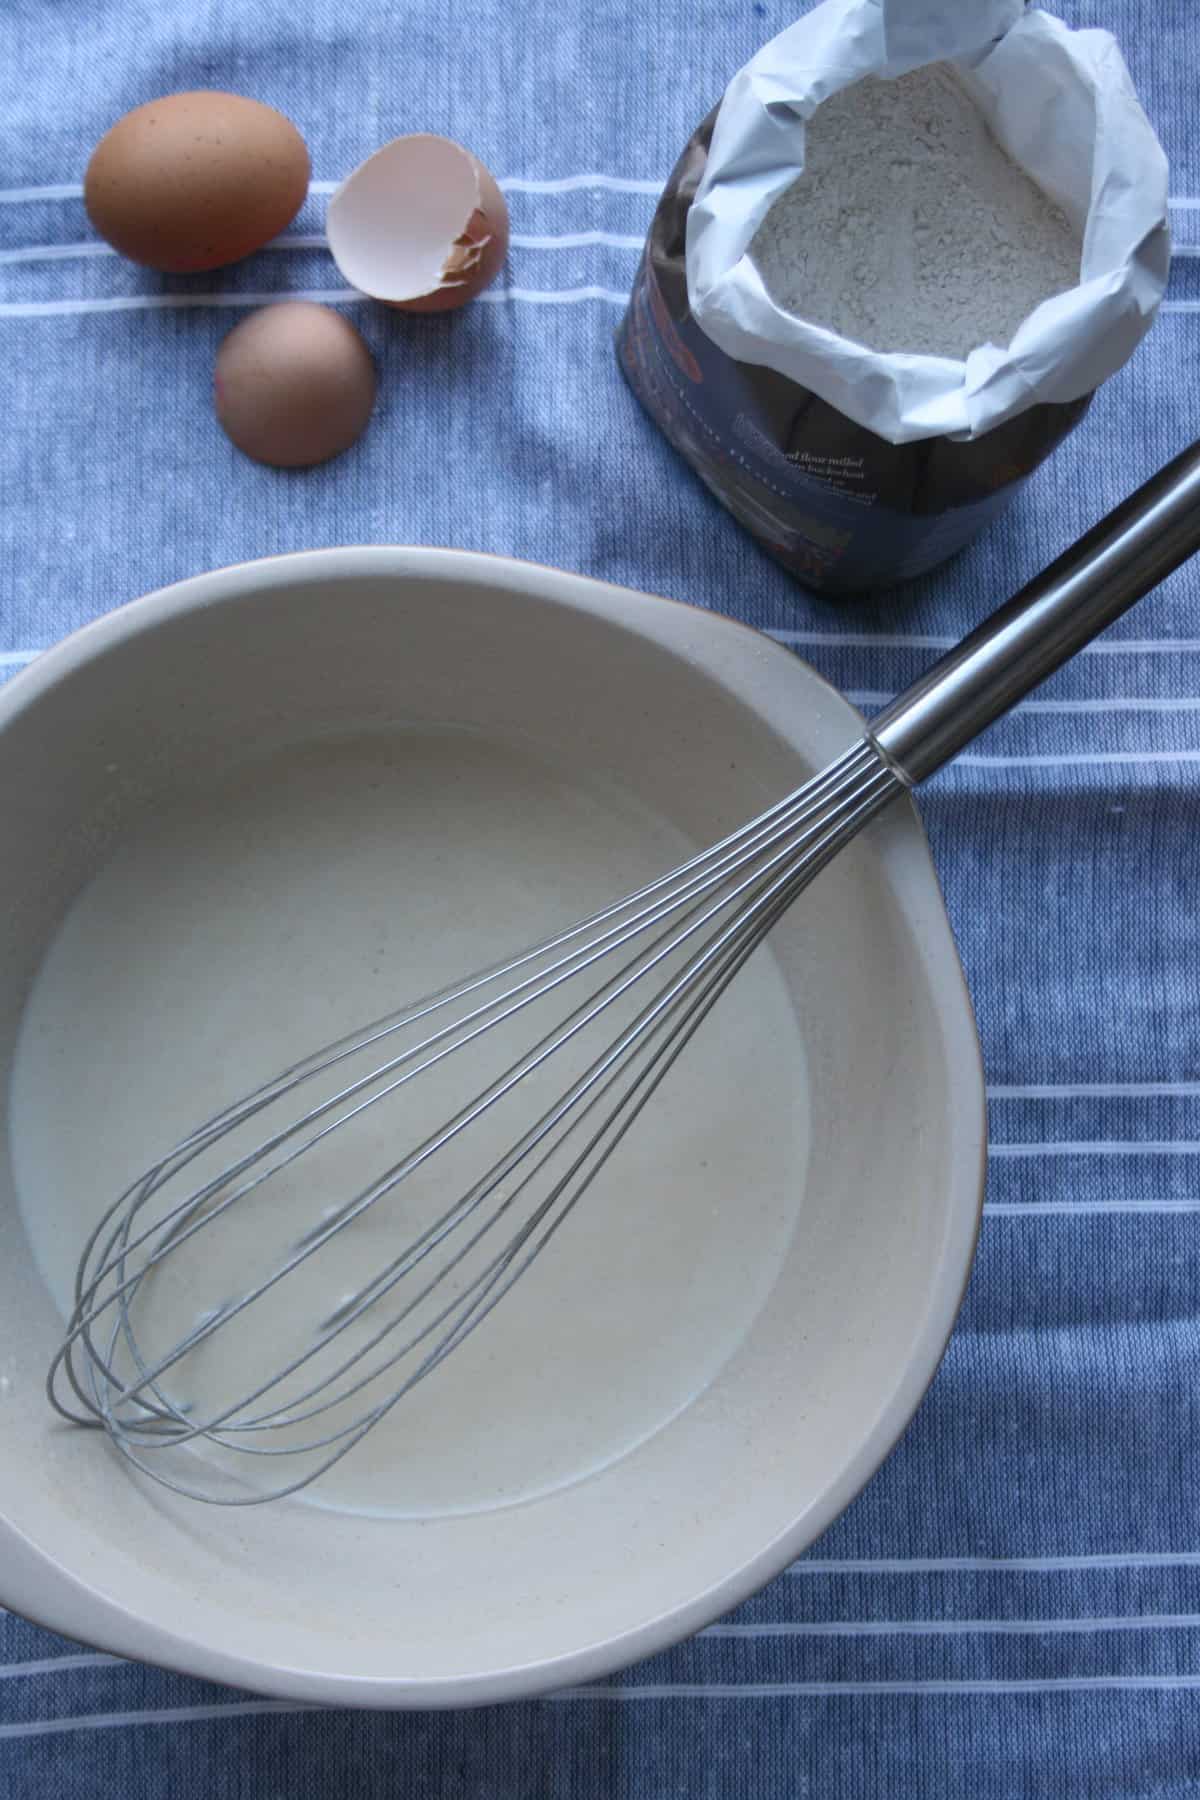 pancake batter in a bowl with a whisk and flour bag above.